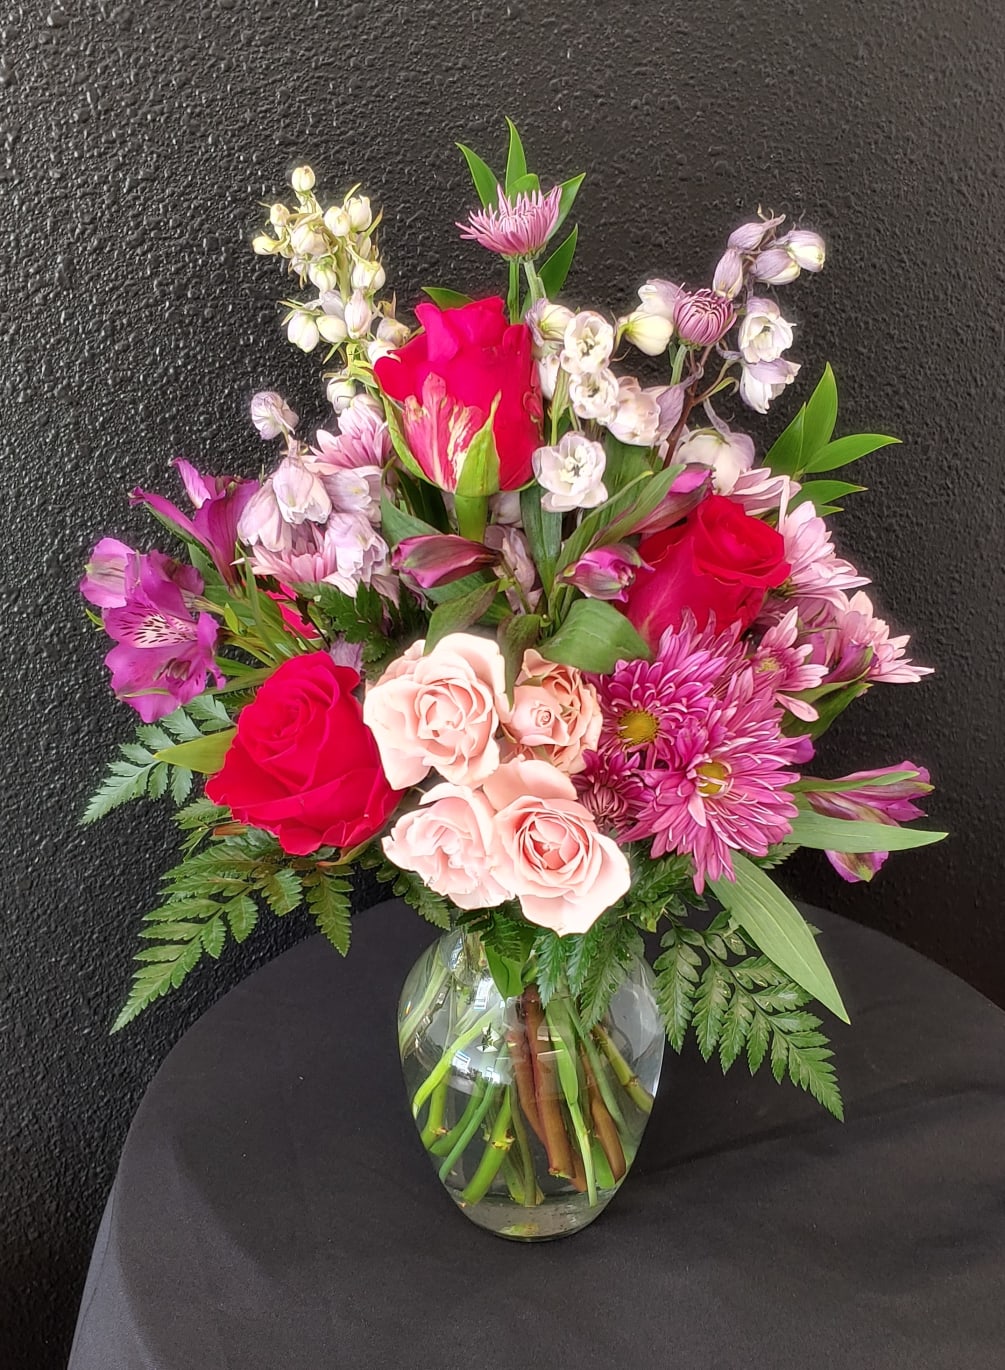 This beautiful arrangement of blooms is perfect for showing your loved ones